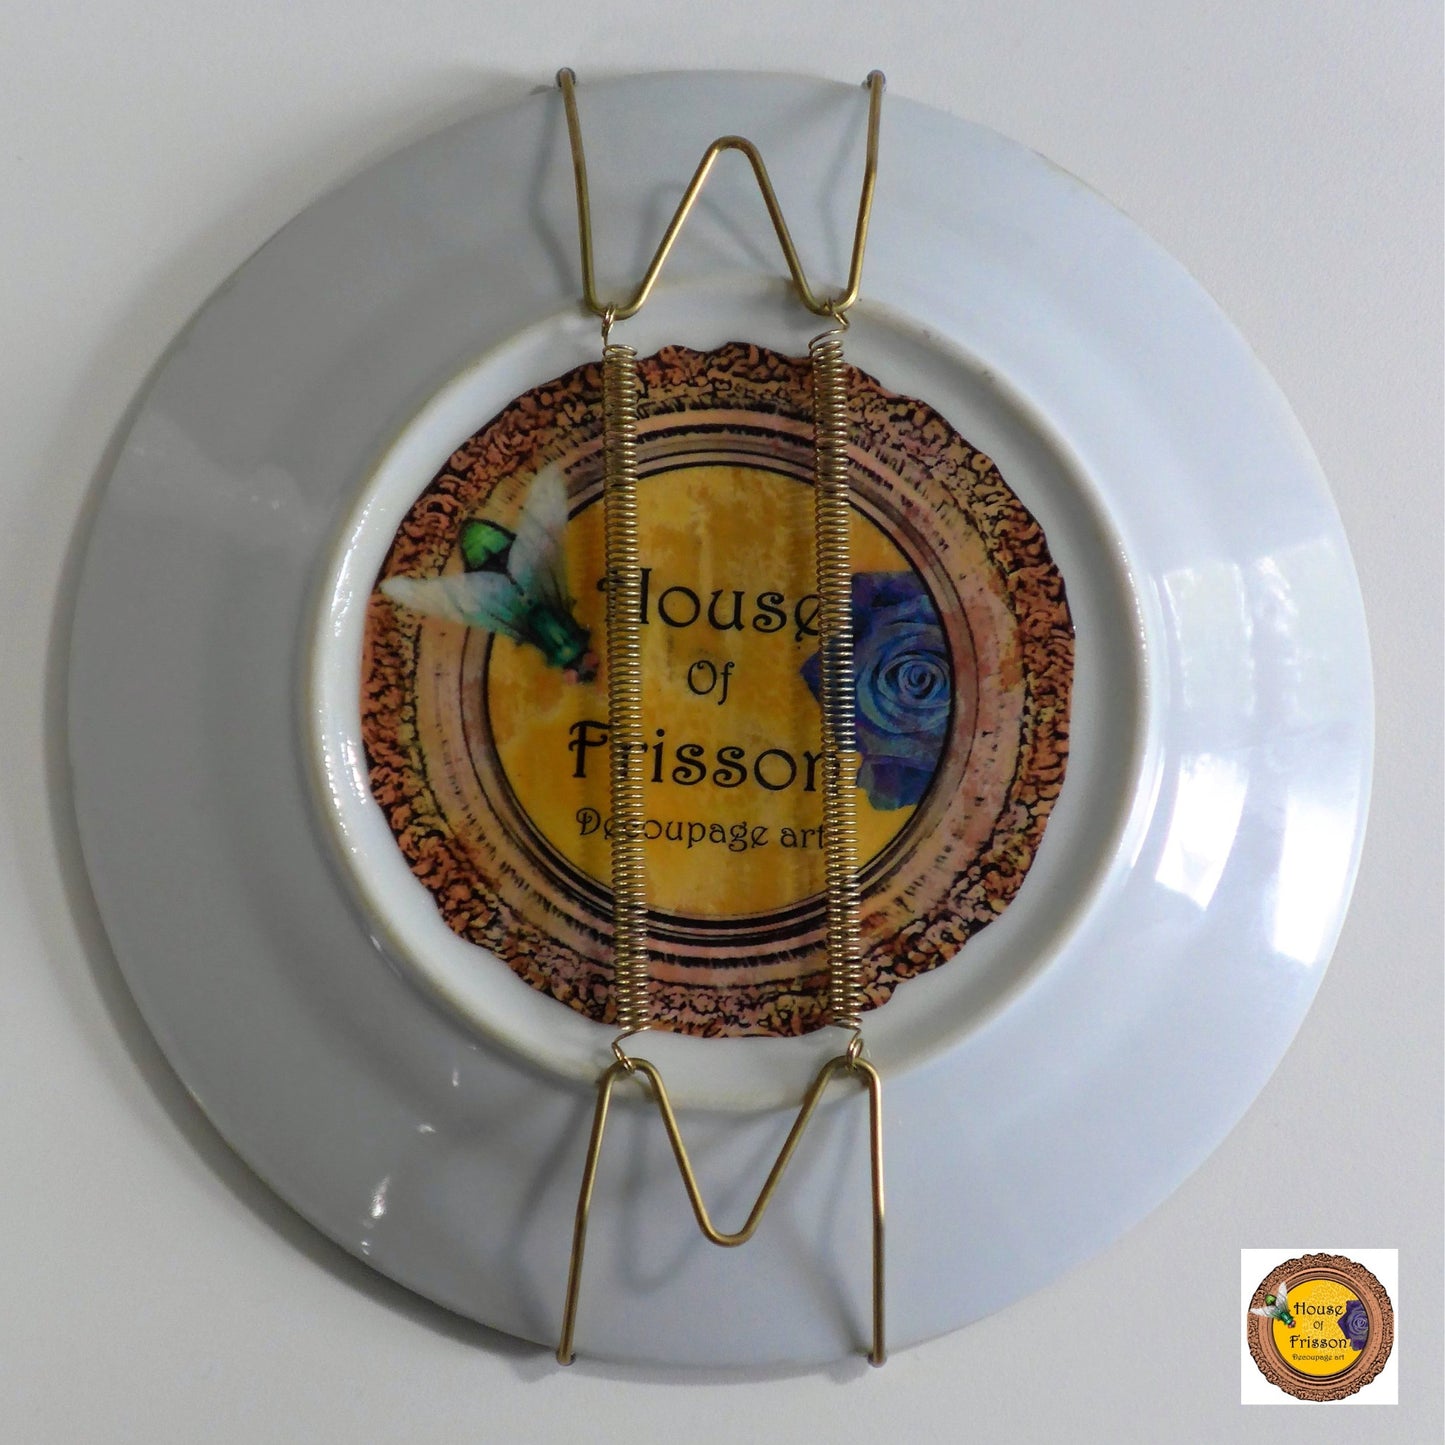 House of Frisson Boo Gold Wall Plate  back